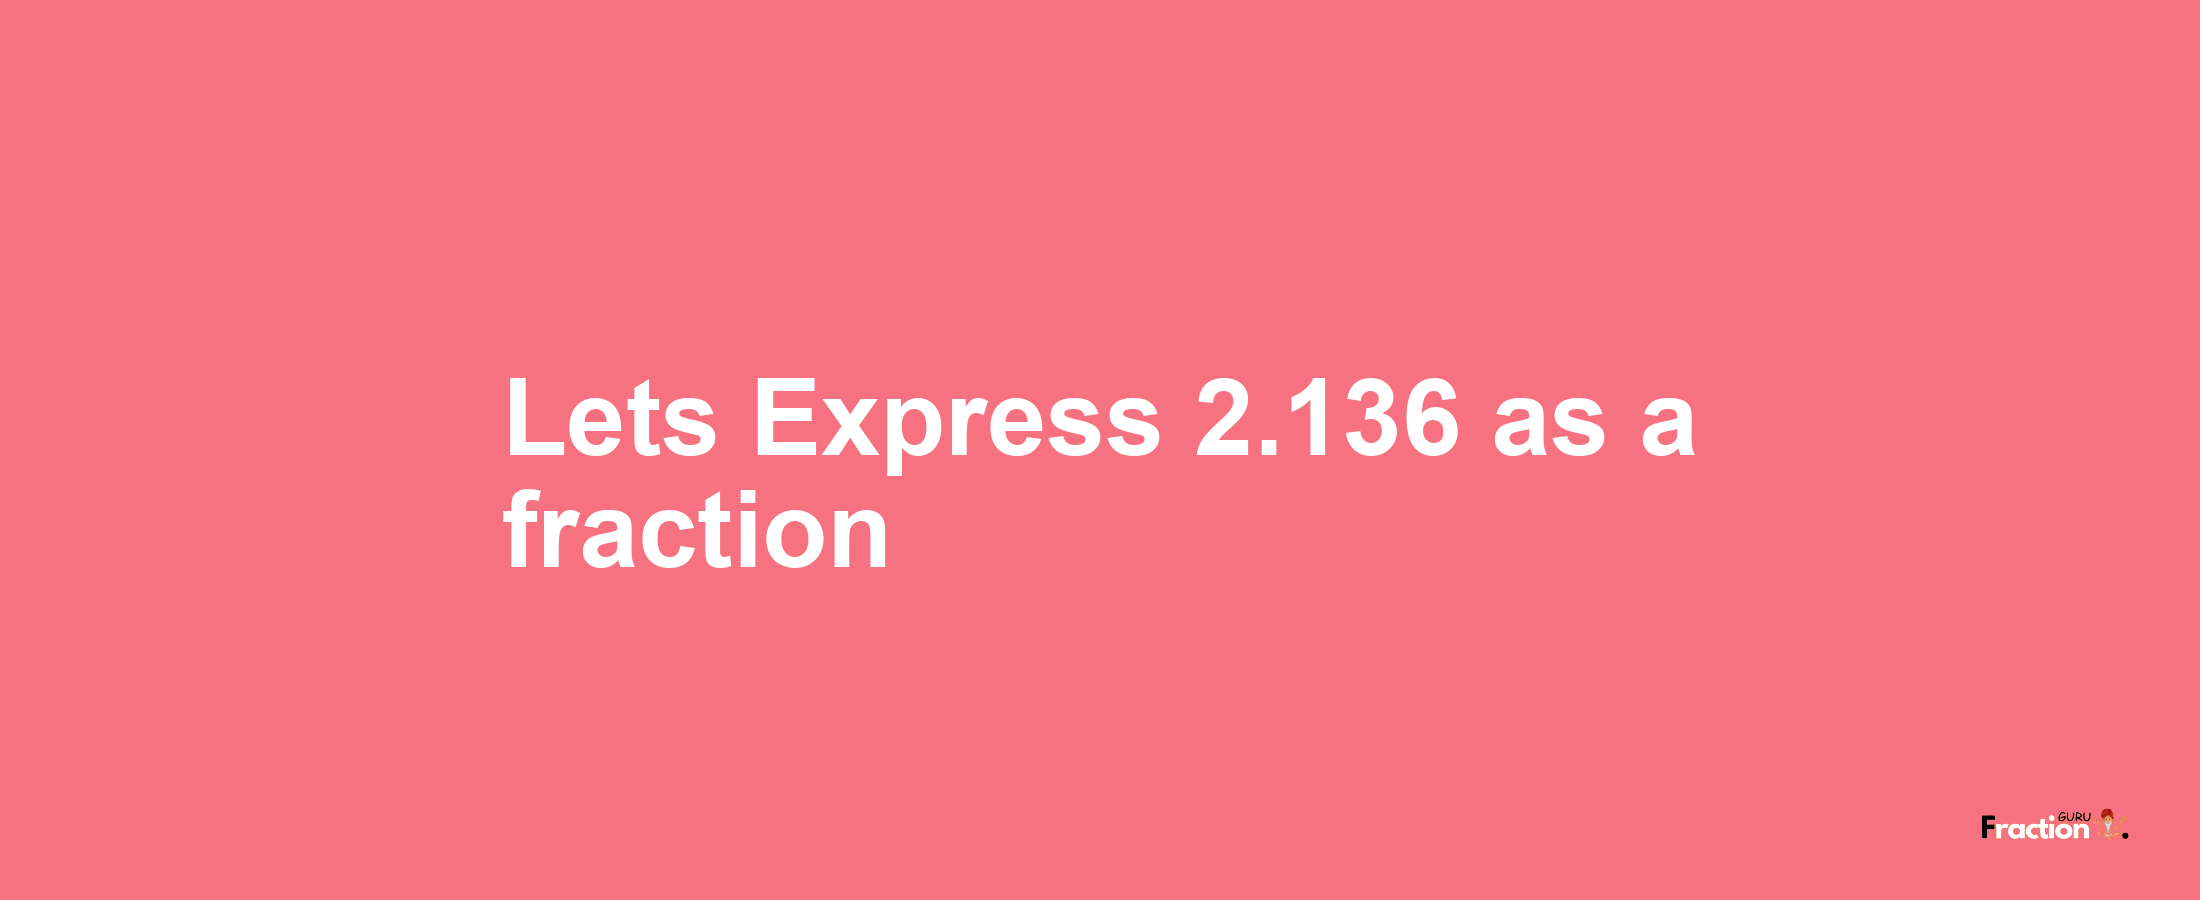 Lets Express 2.136 as afraction